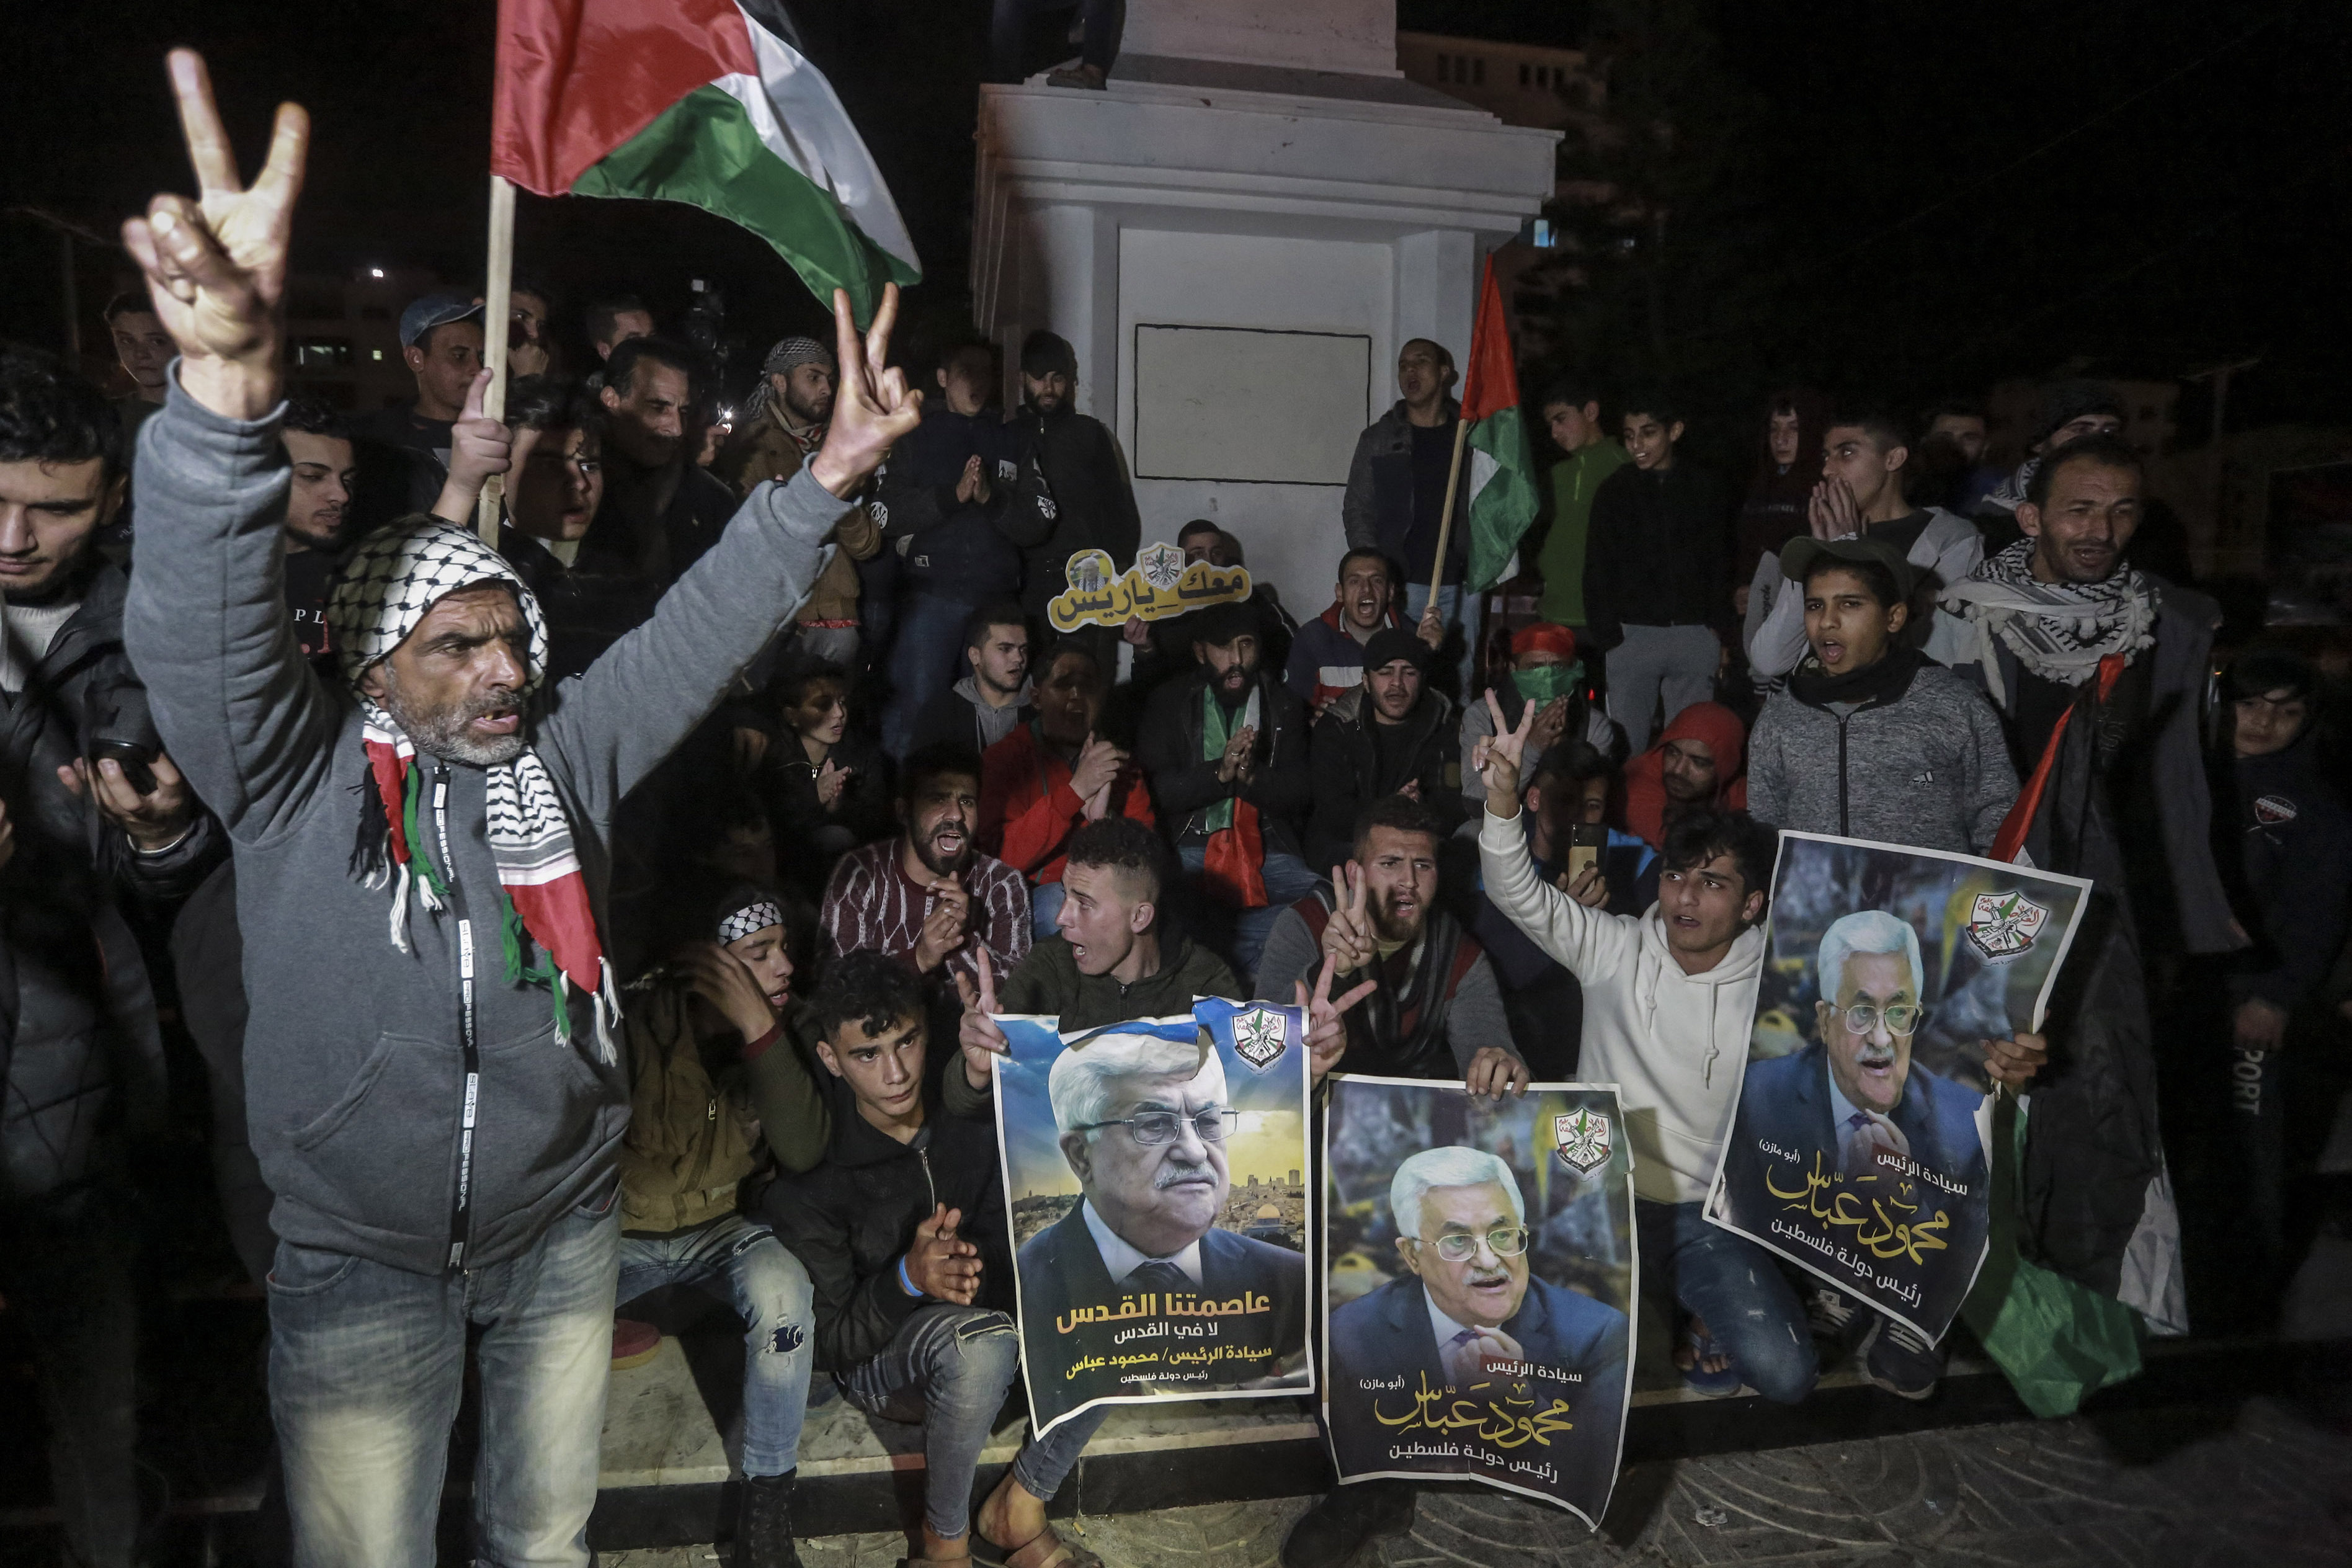 28 January 2020, Palestinian Territories, Gaza City: Palestinian demonstrators hold pictures of Palestinian President Mahmoud Abbas during a demonstration against US President Donald Trump's Middle East peace plan. Photo by: Mohammed Talatene/picture-alliance/dpa/AP Images